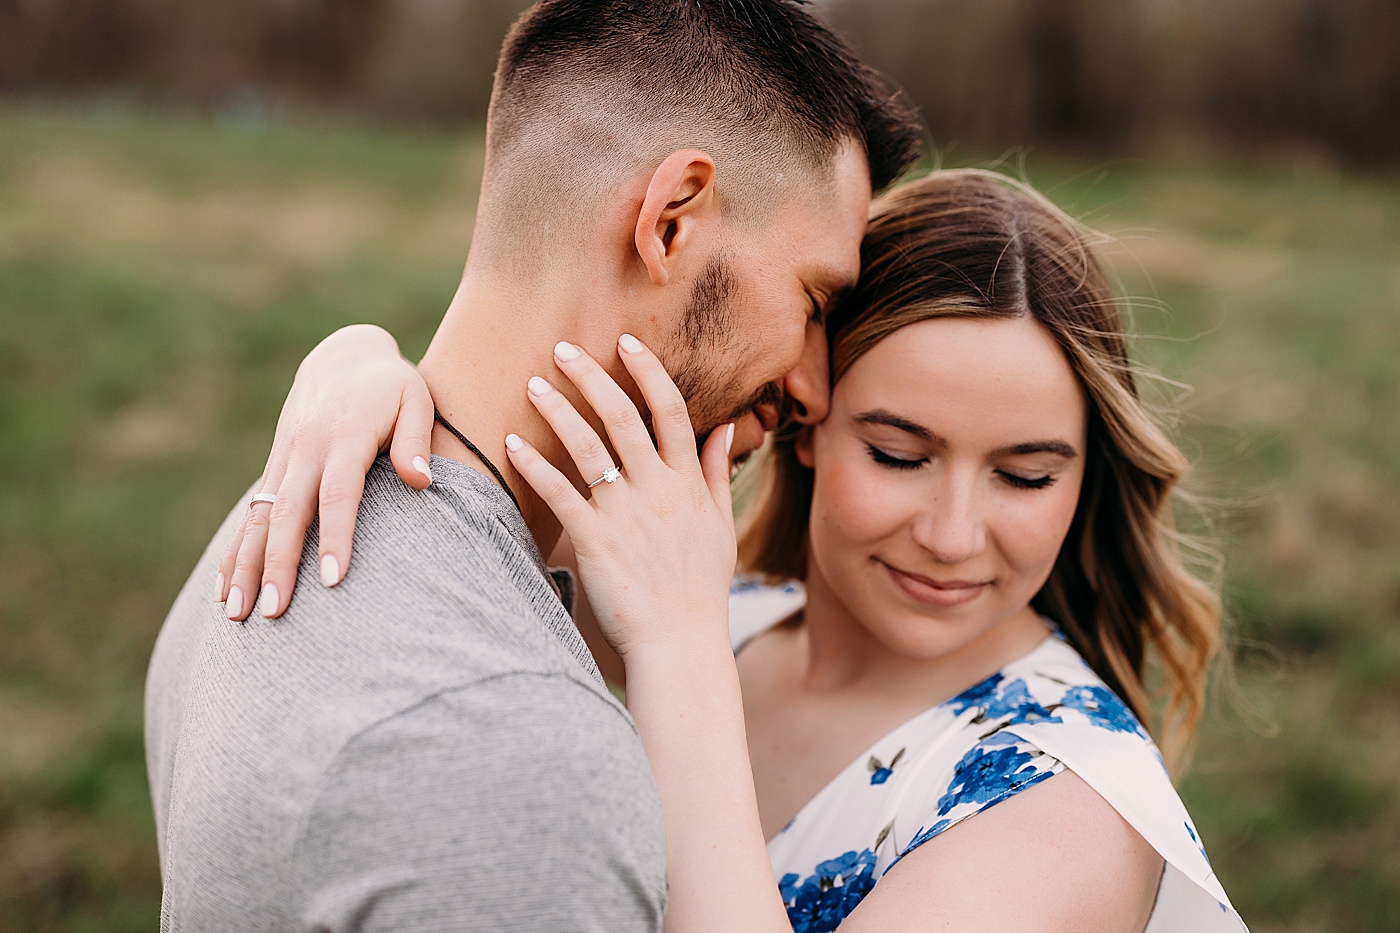 Couple hugging during engagement photos, showing ring | Photo by Megan Montalvo Photography